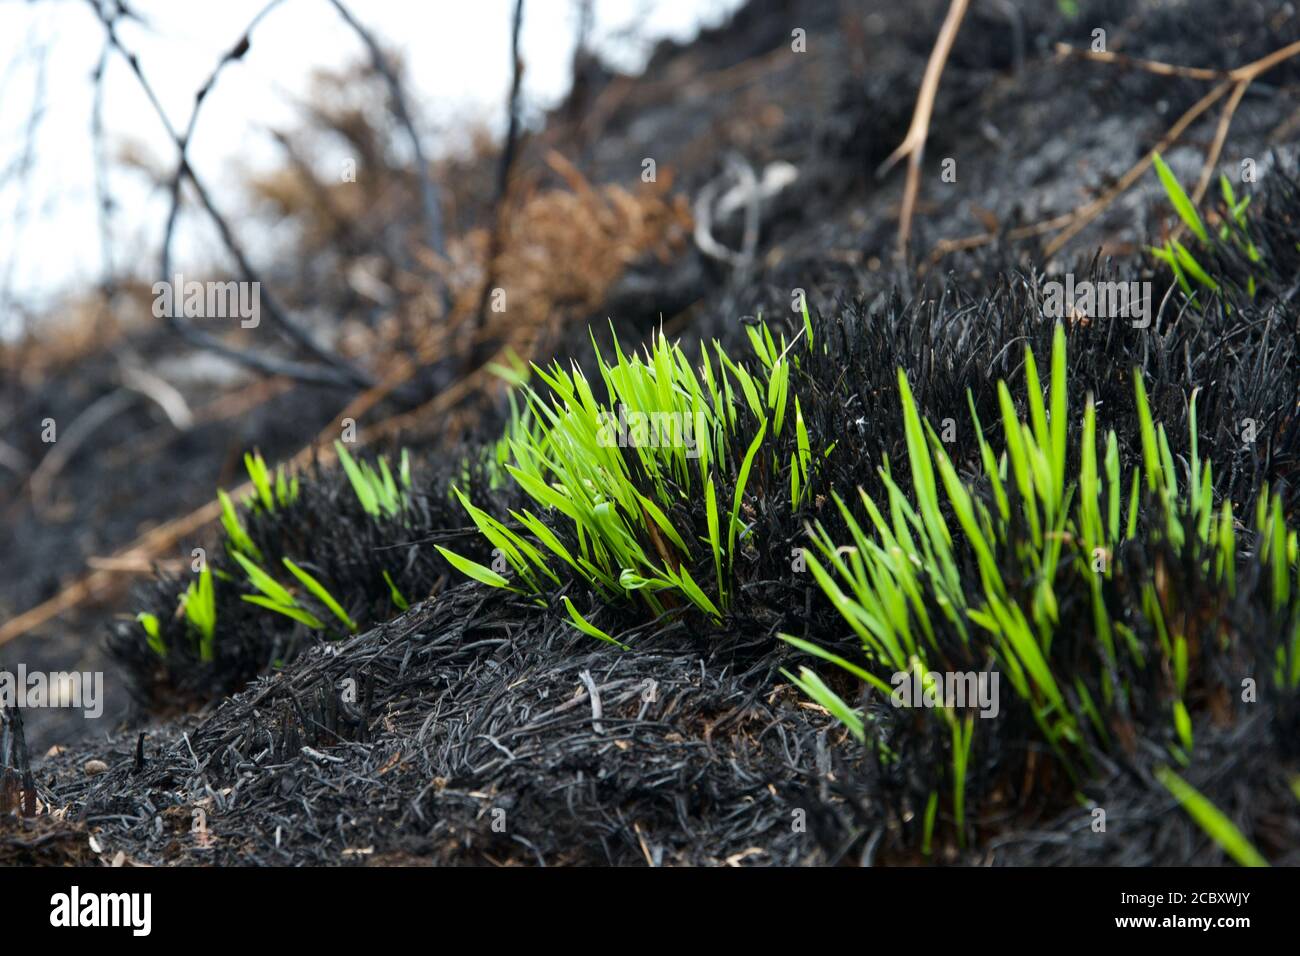 Extraordinary fresh green shoots: blades of grass growing out of the ash and burnt remains barely days after a wild fire in the countryside - rebirth Stock Photo